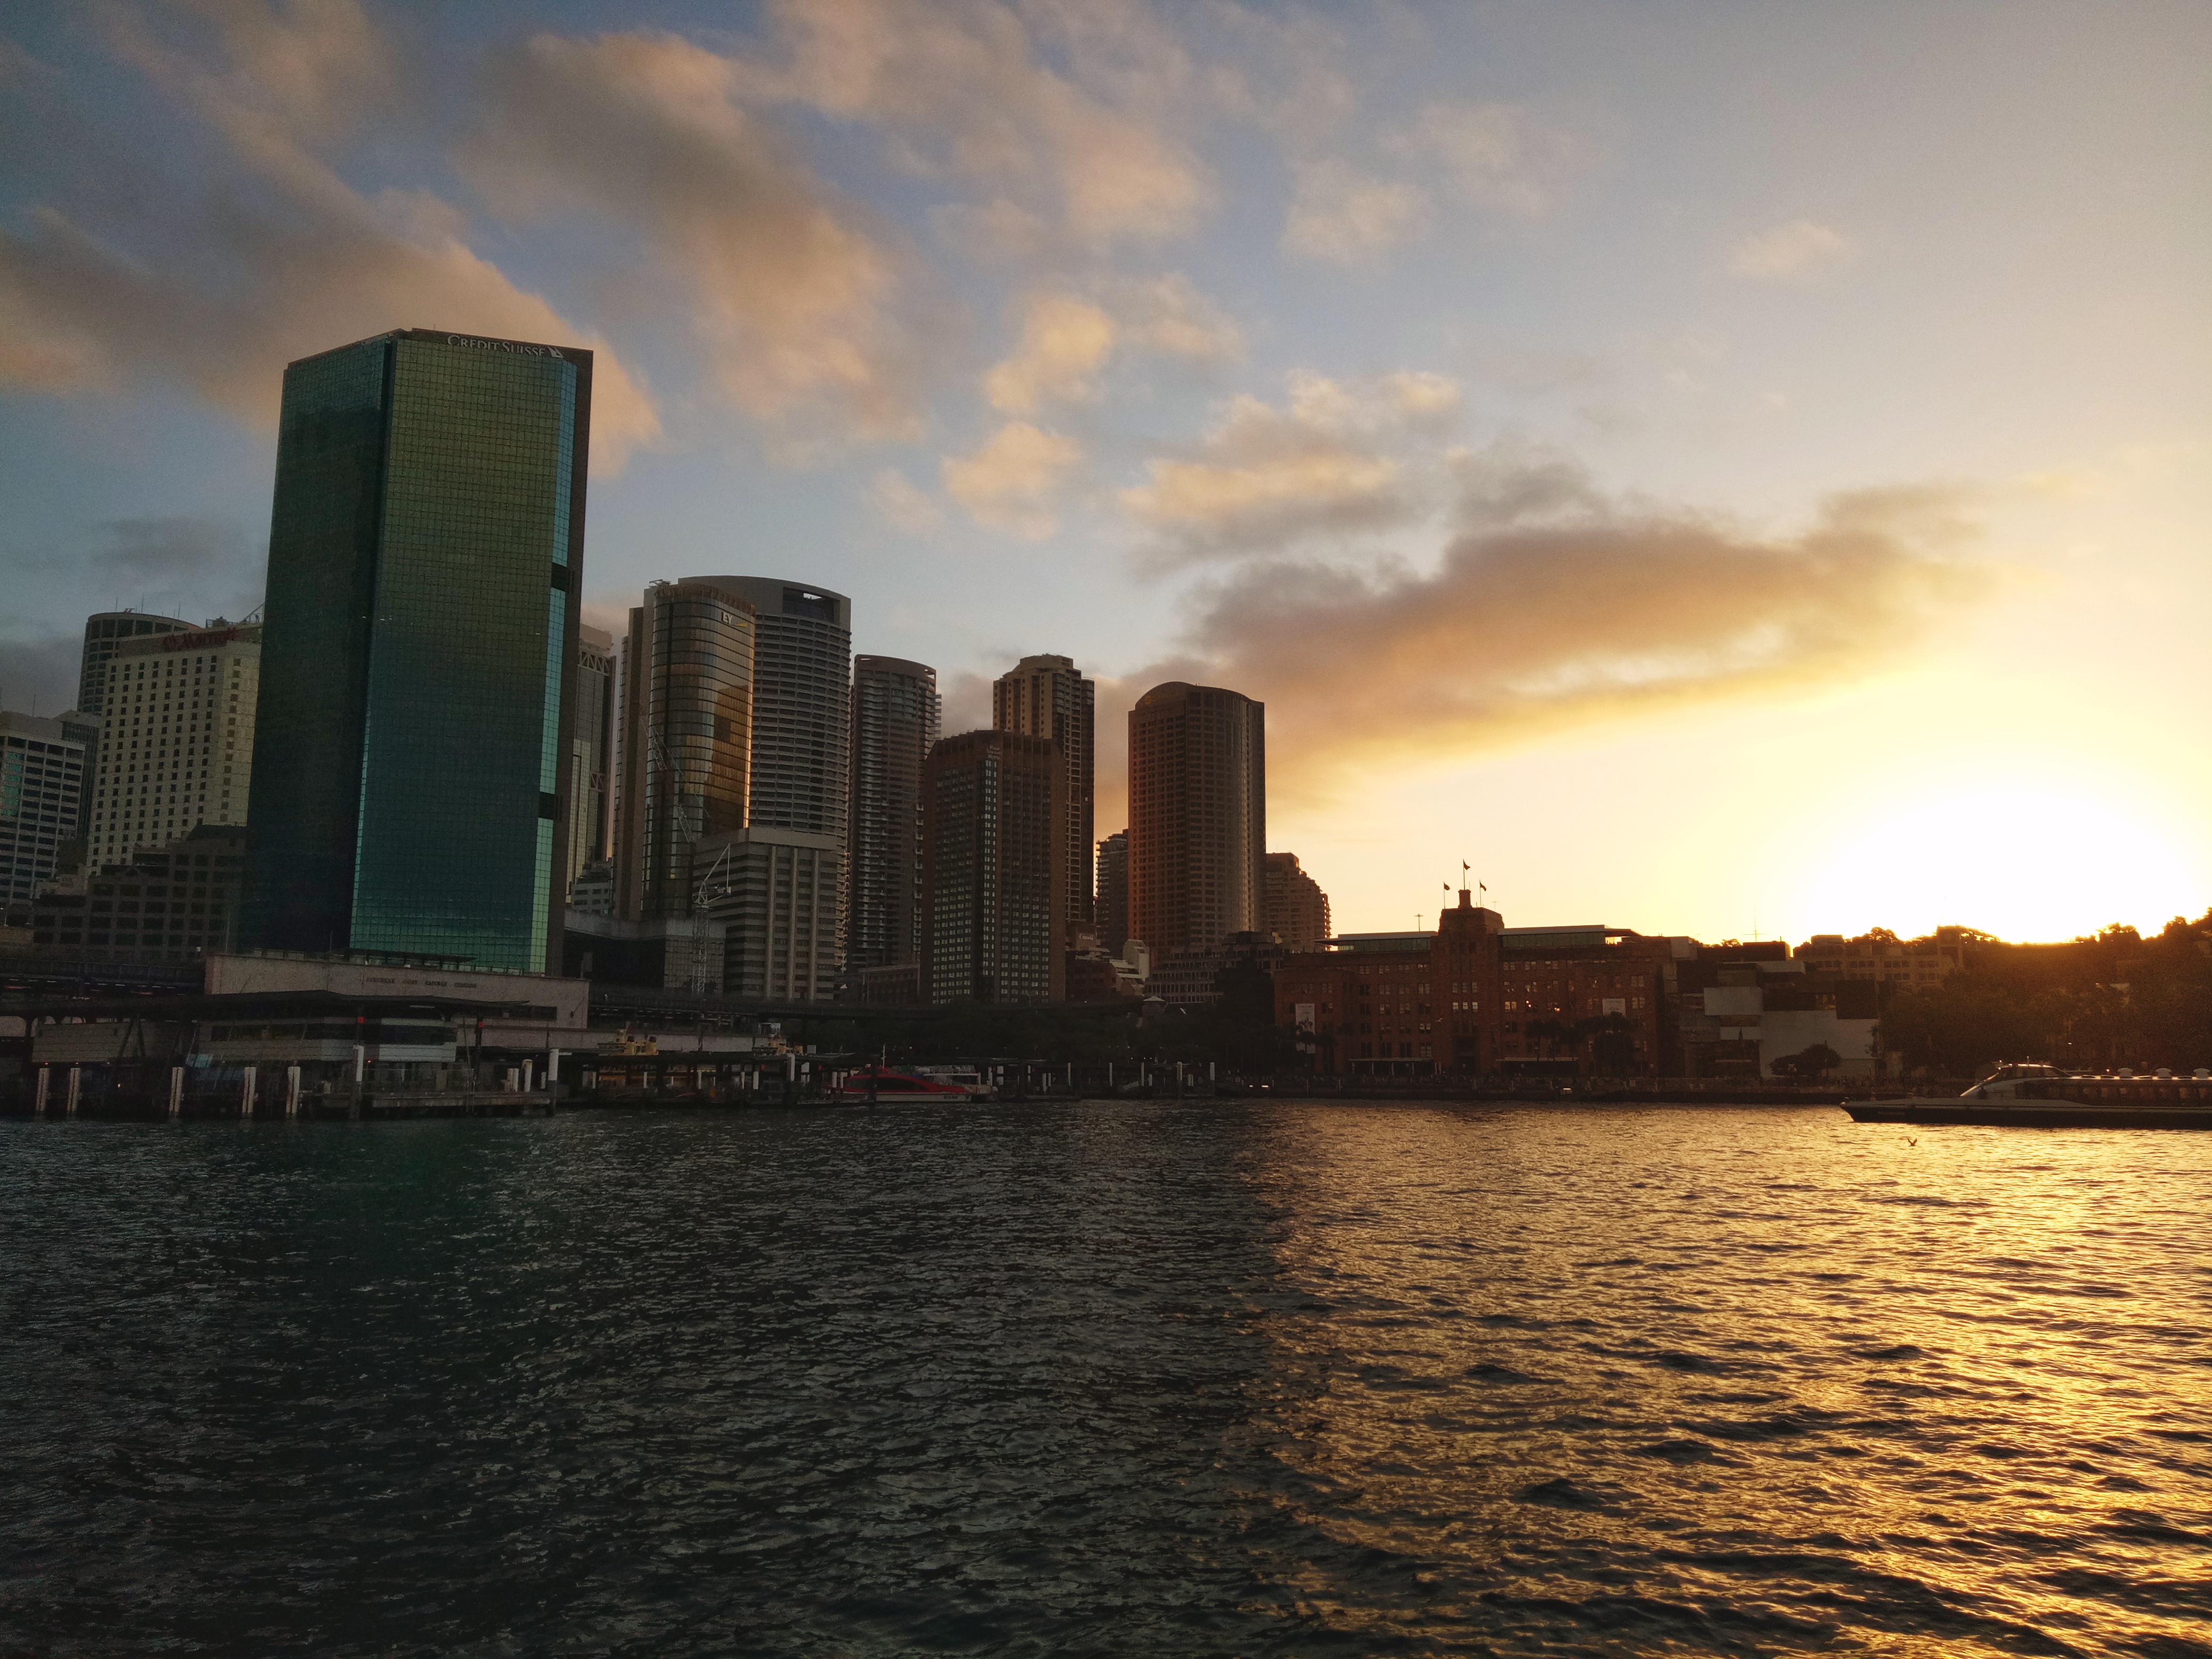 Image of the Sydney harbour at sunset